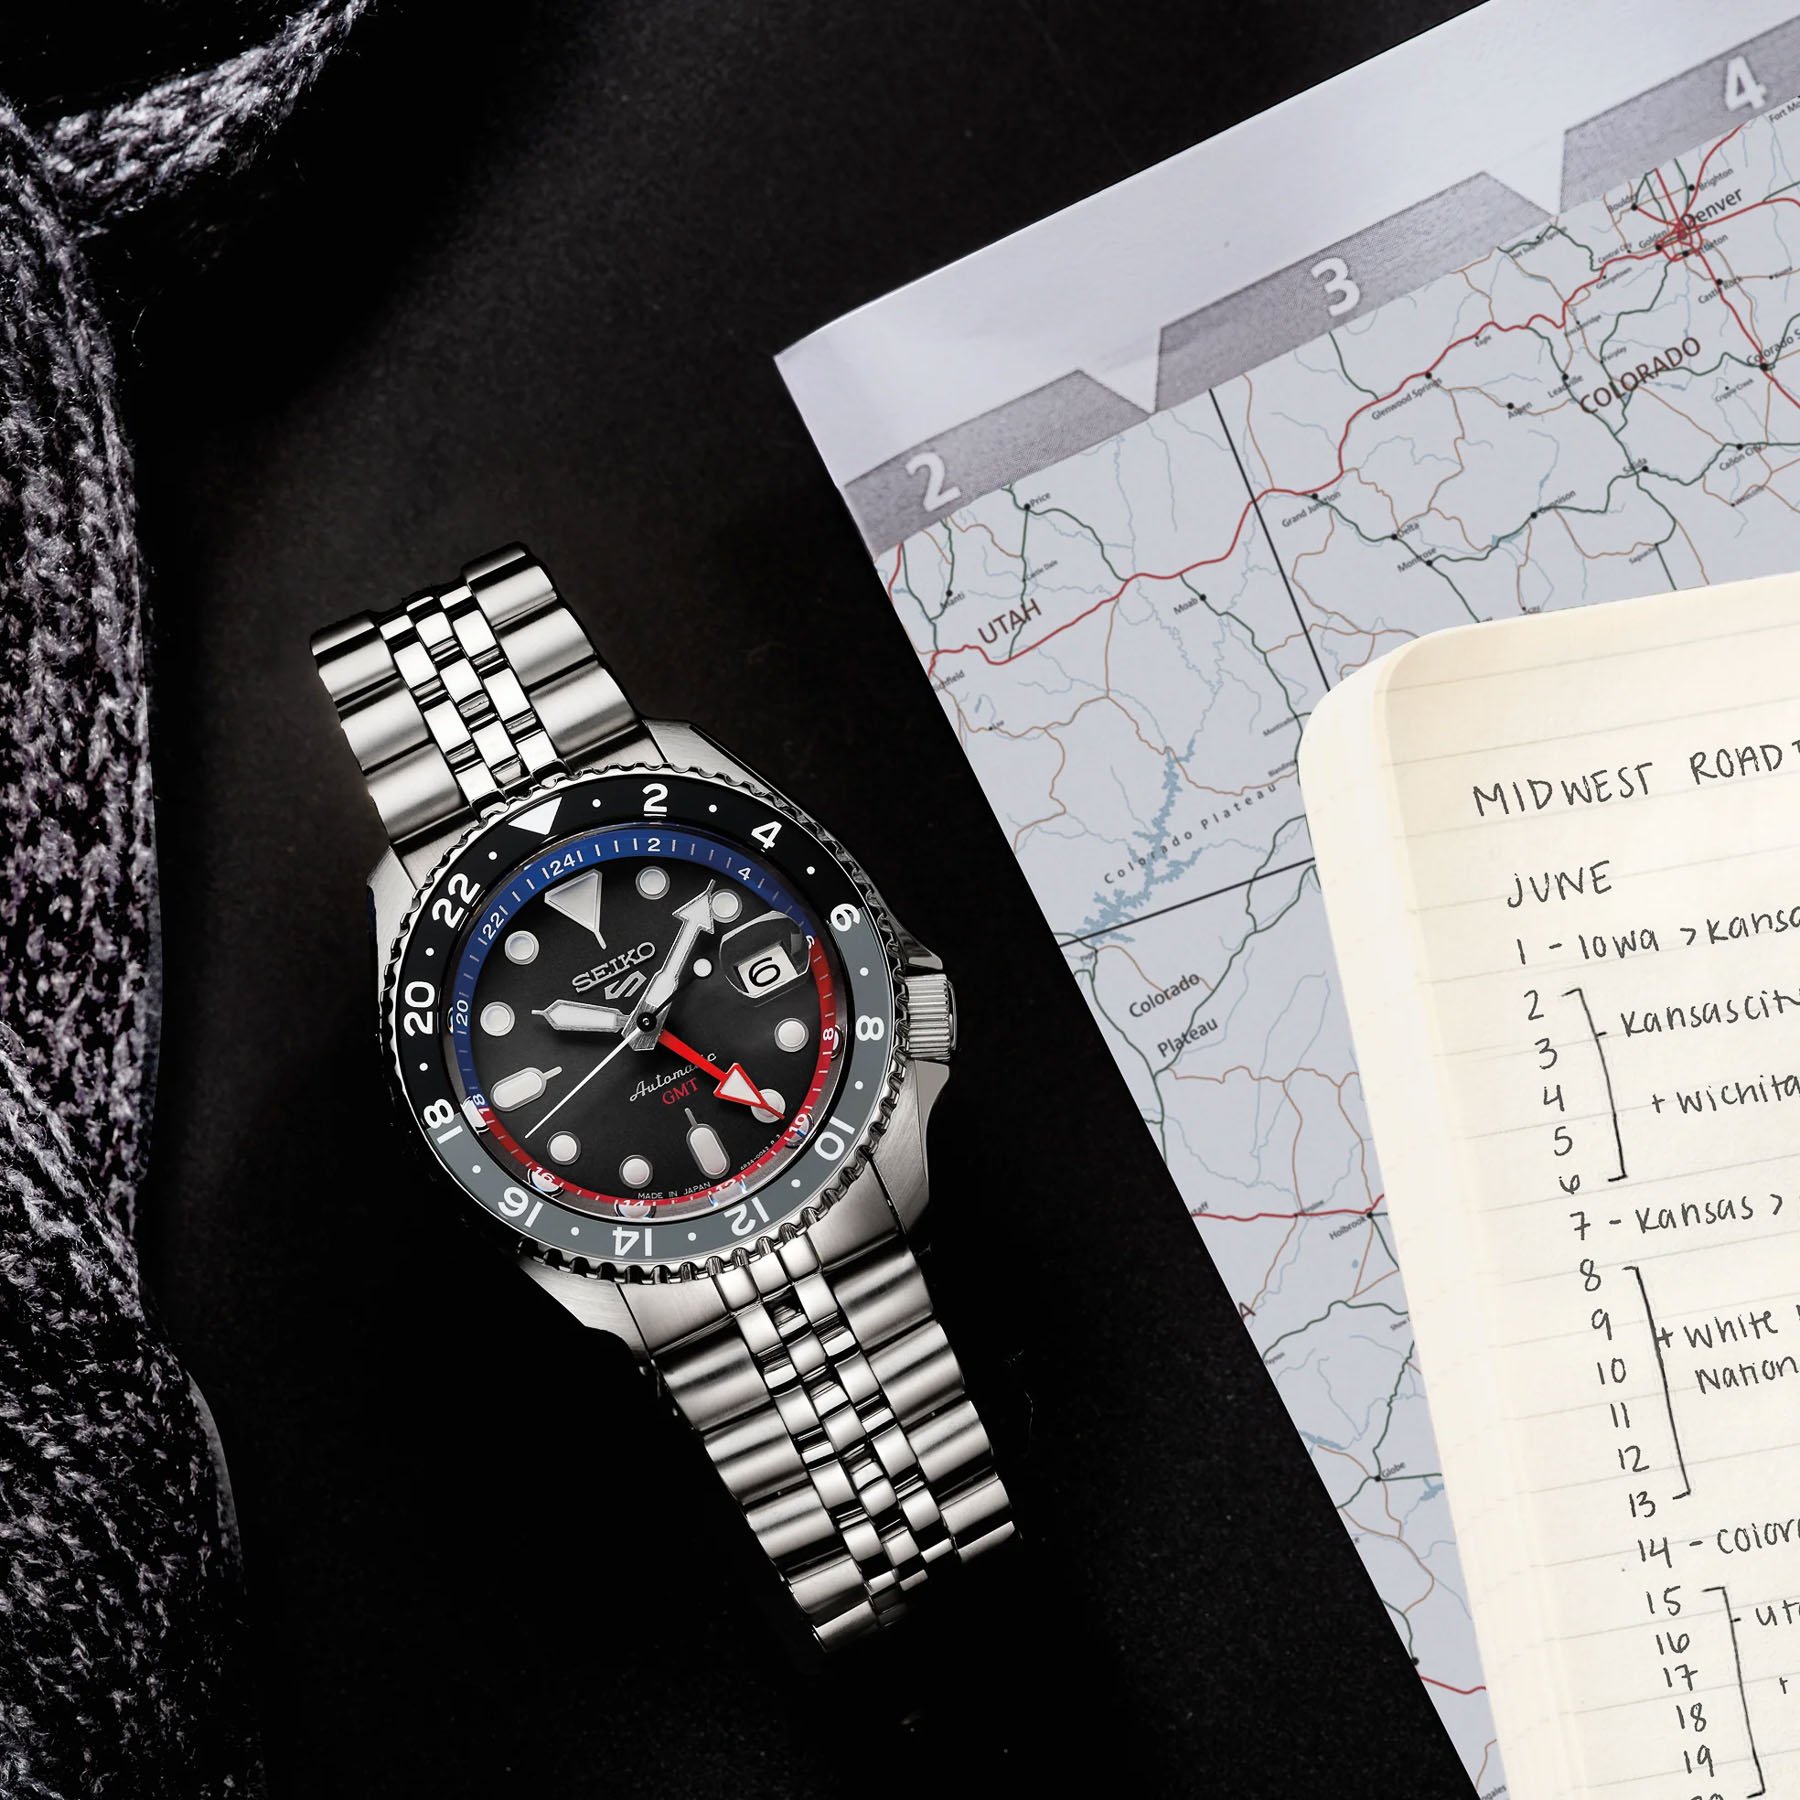 Seiko 5 Sports broadens its horizons with a new GMT series.